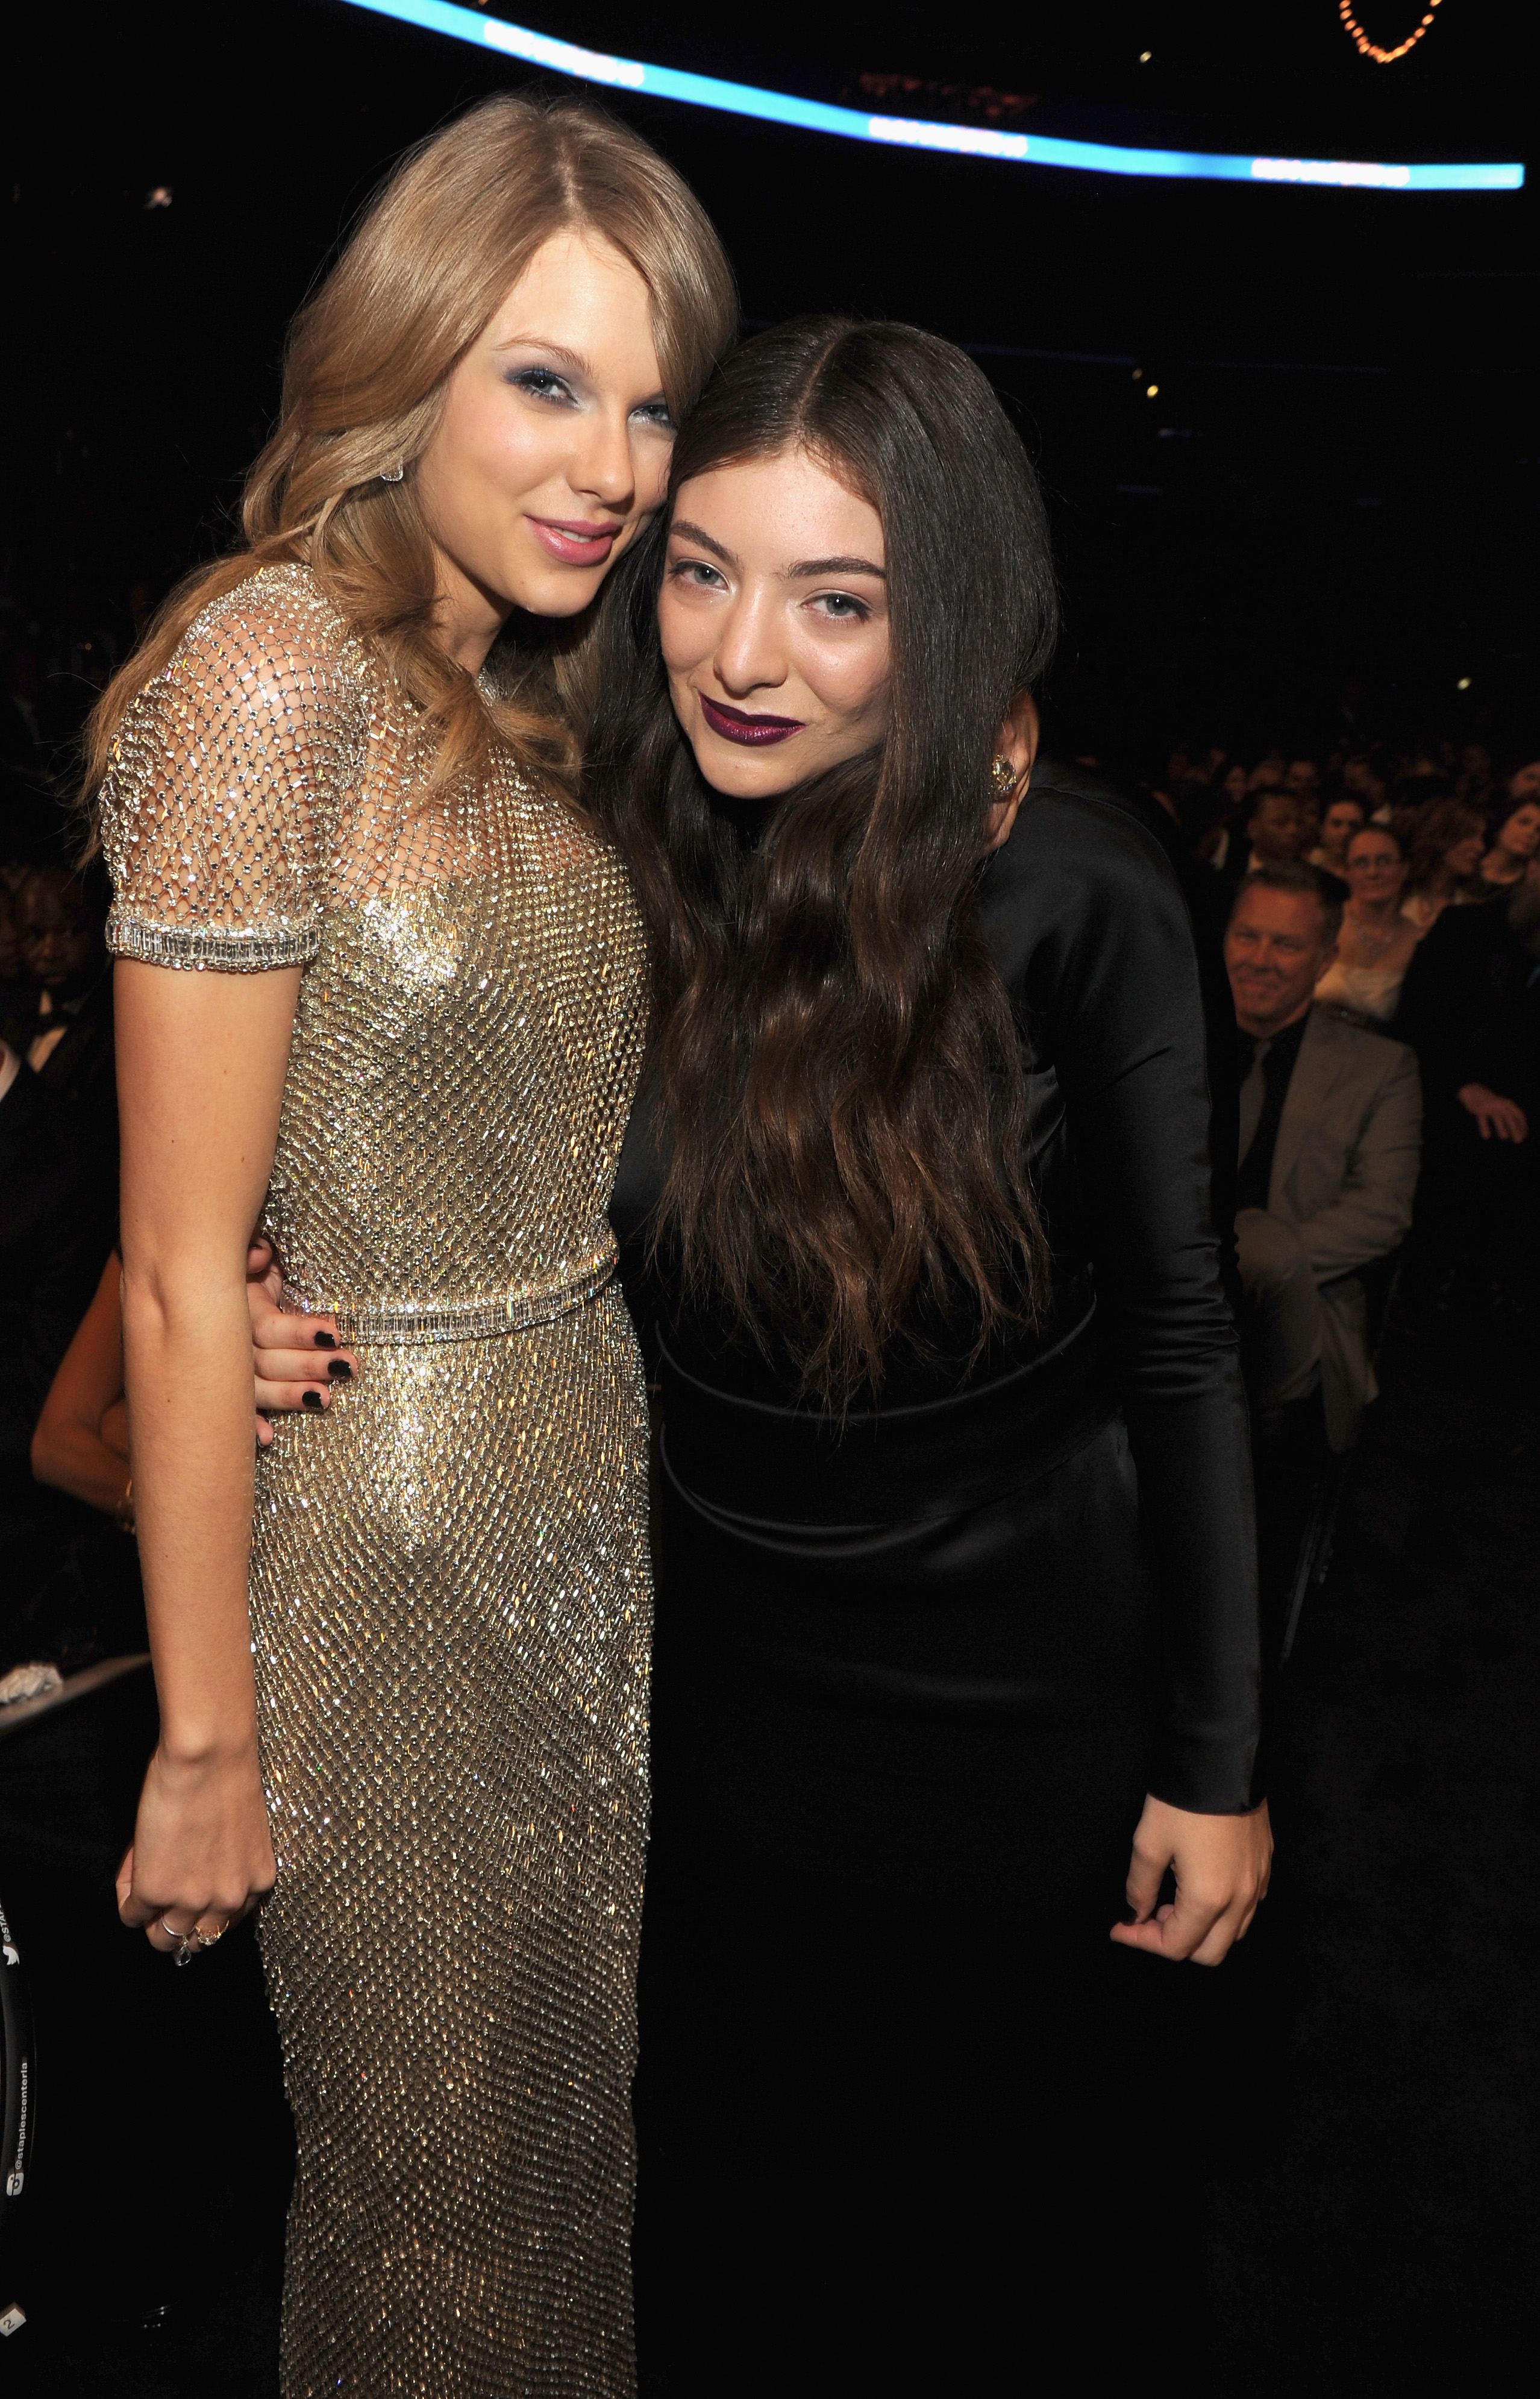 Lorde S Awesome Reaction When Asked If She S In A Lesbian Relationship With Taylor Swift Cambio